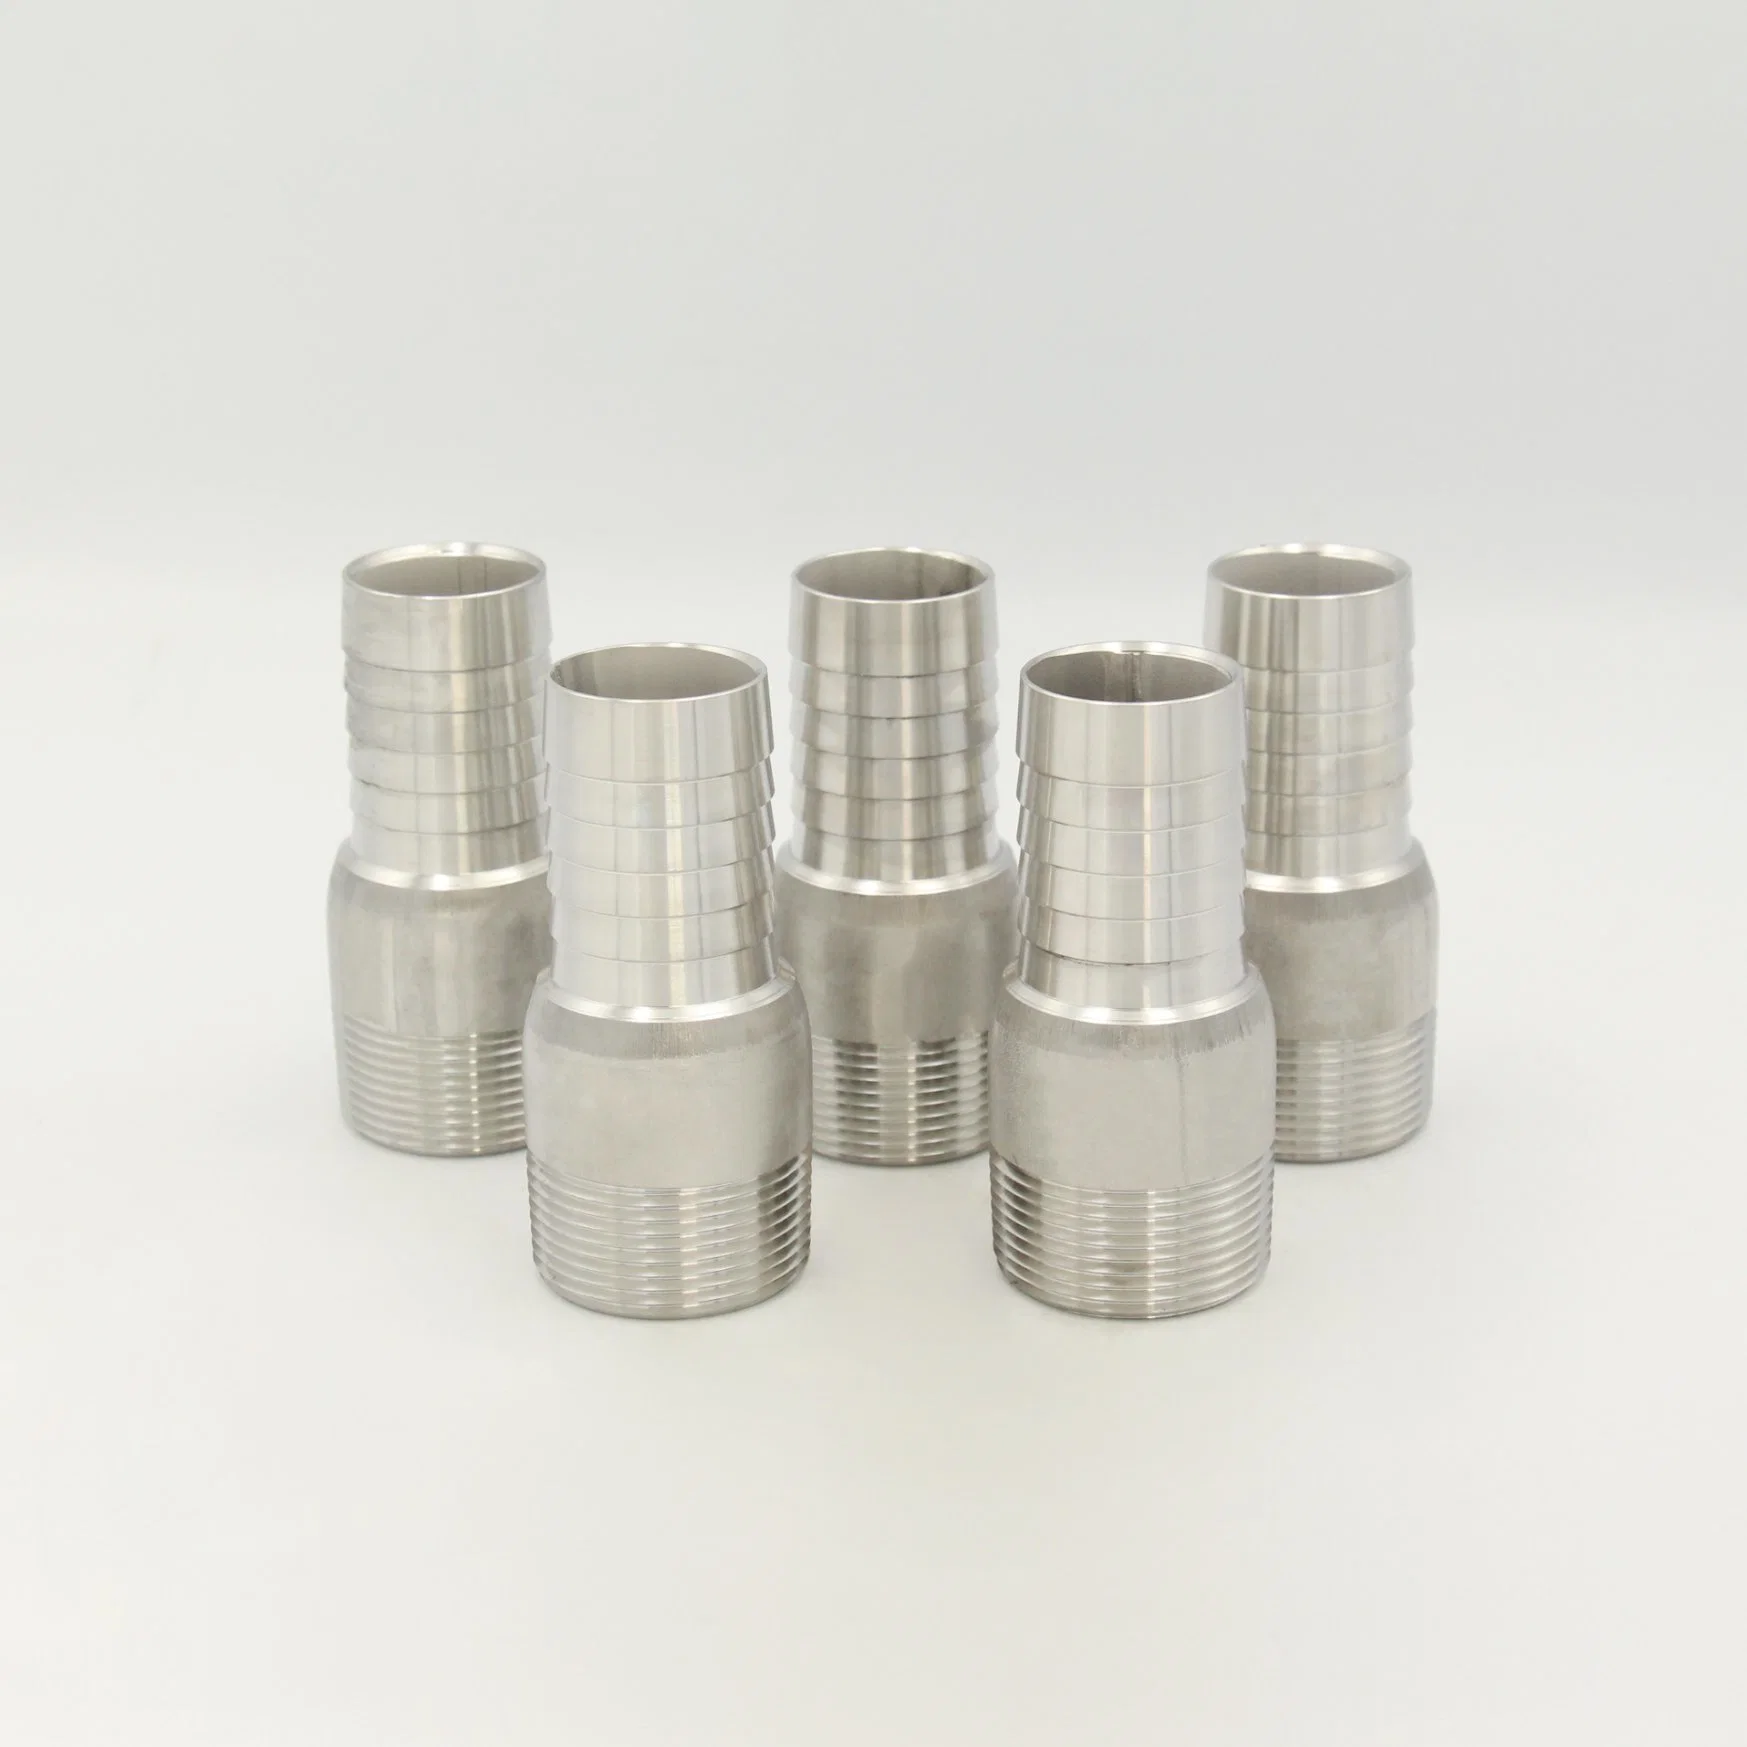 Stainless Steel High quality/High cost performance Hose Fitting King Nipple